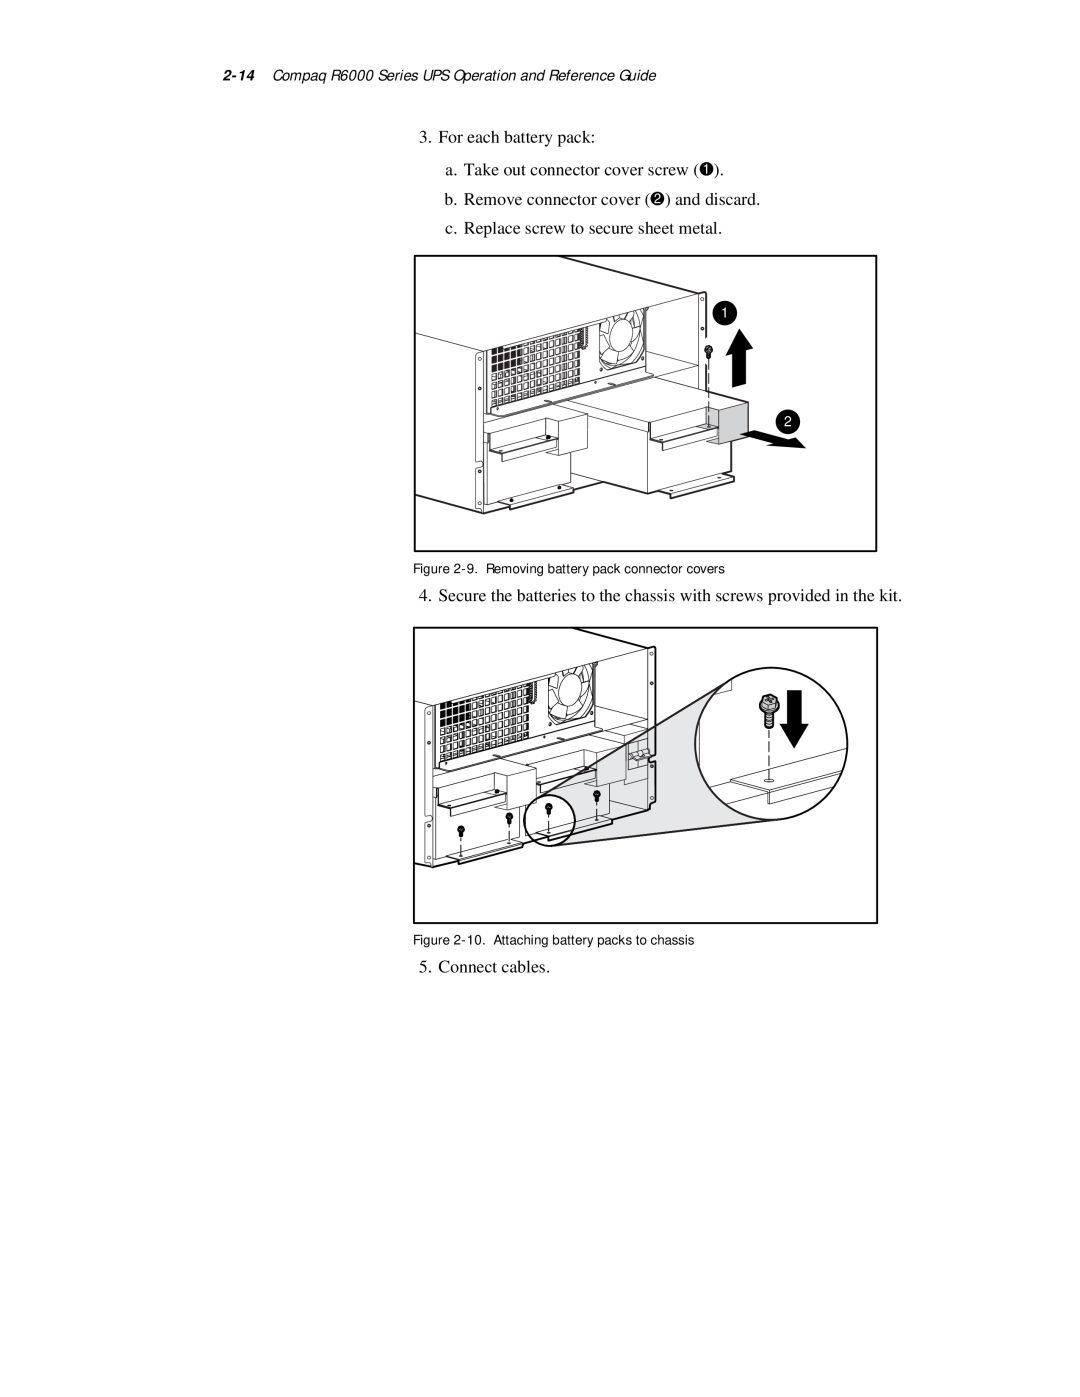 Compaq Compaq R6000 Series UPS Operation and Reference Guide, For each battery pack a. Take out connector cover screw 